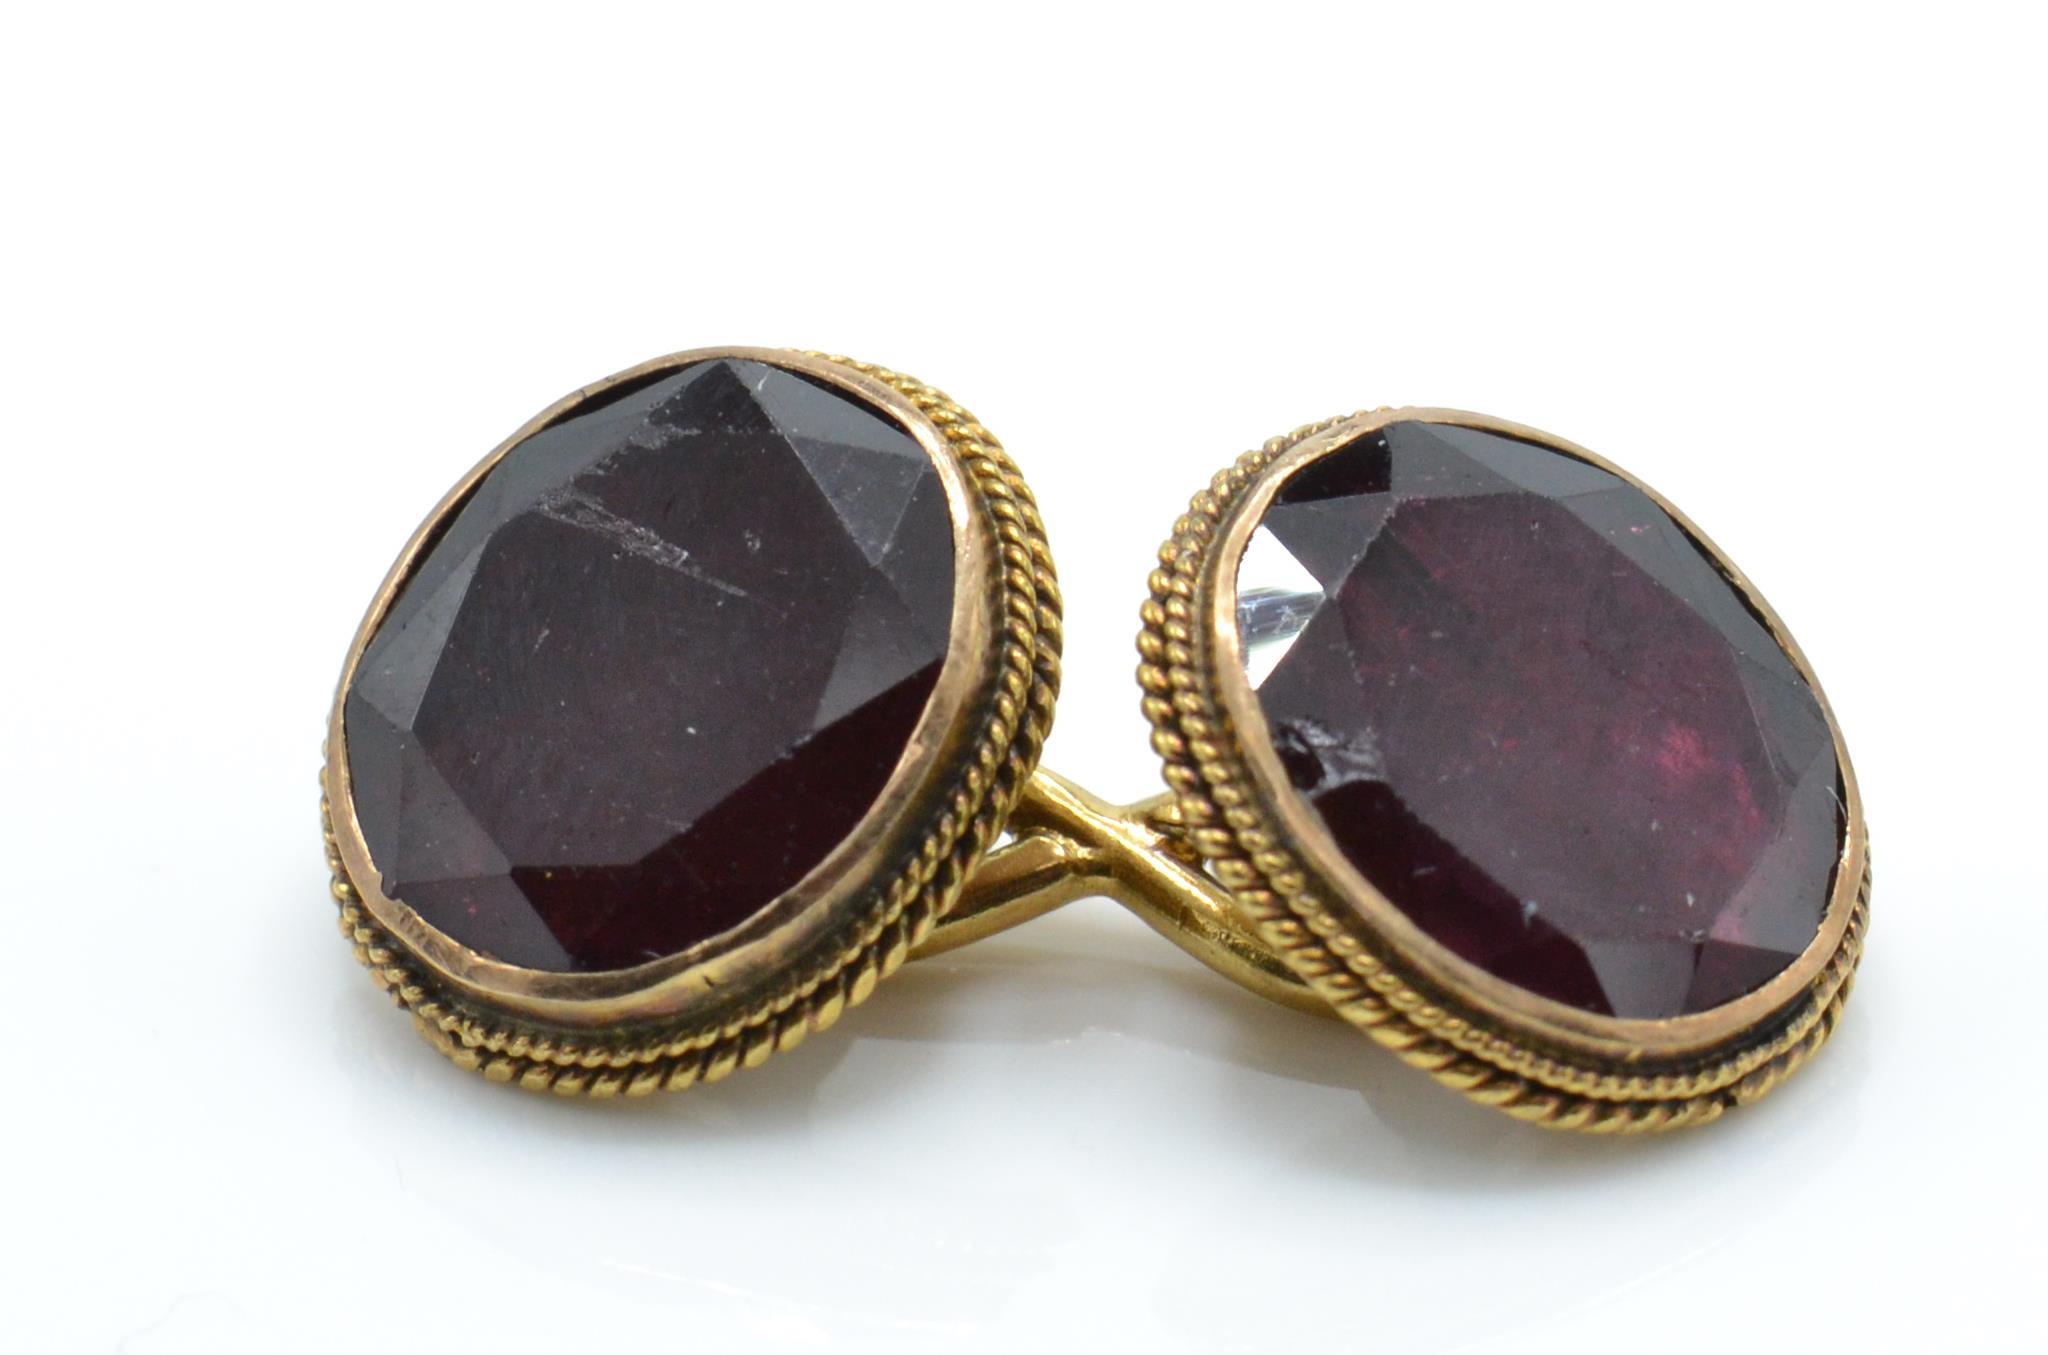 A pair of 15ct gold Victorian / Edwardian cufflinks set with facet cut garnets - Image 4 of 5